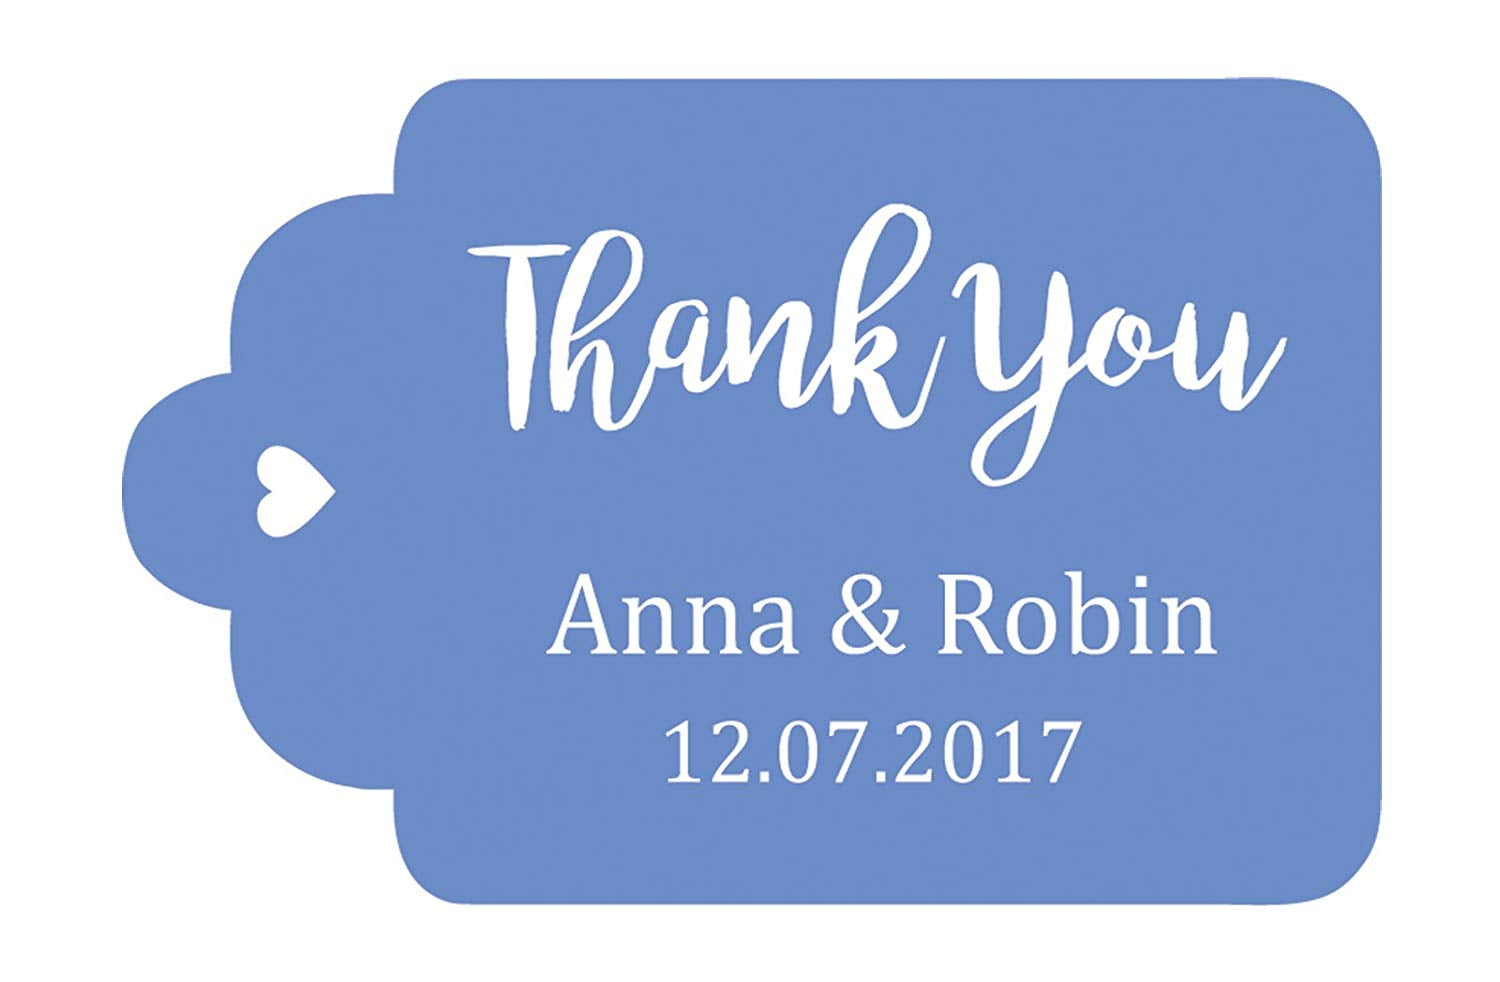 Printable Thank You Tags, Navy Blue and Gold Custom Party Favor Tags #8618  - Baer Design Studio